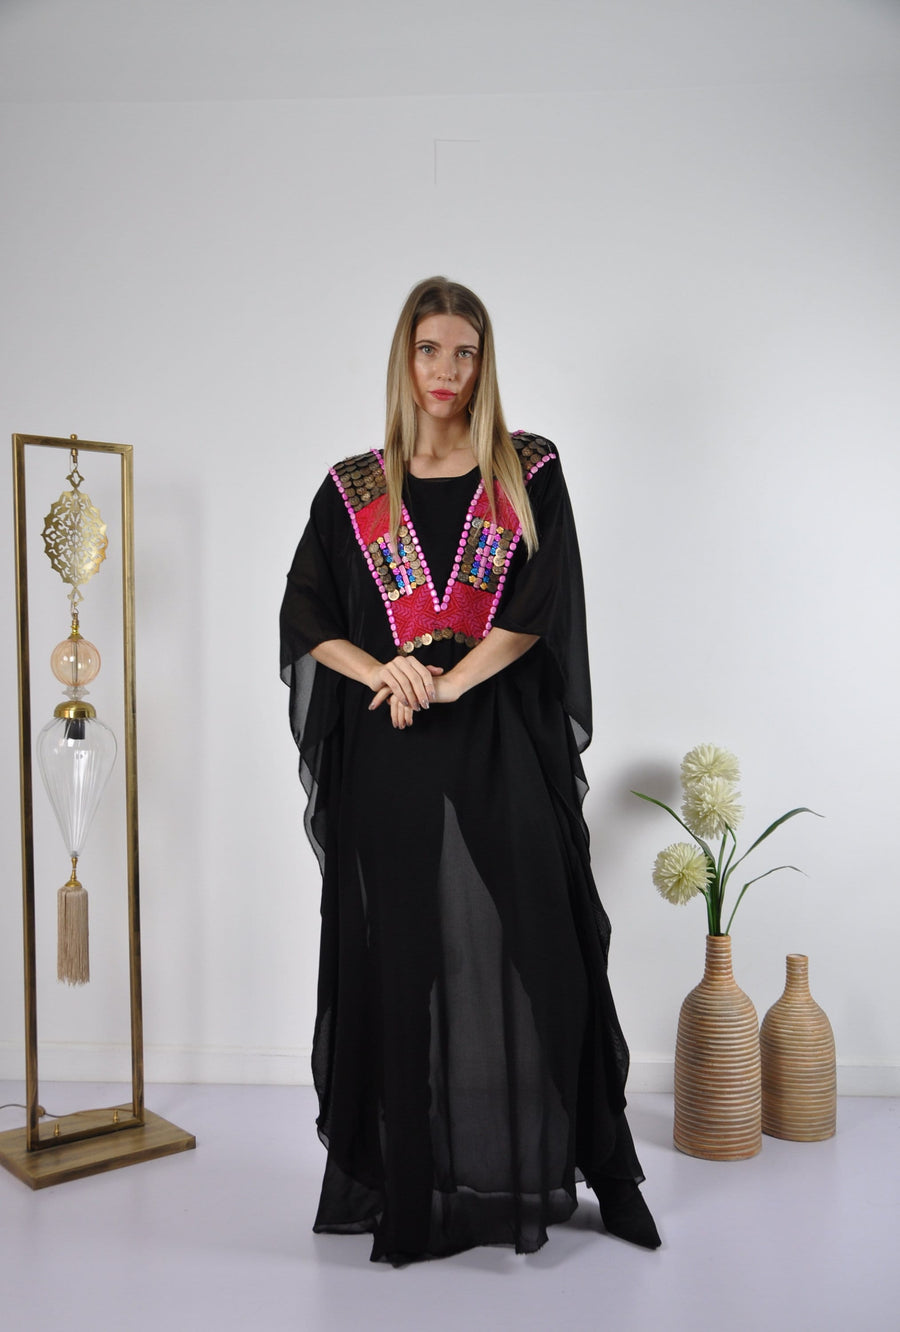 Hand embroidered Chiffon caftan, black vintage embroidered caftan, chic caftan, Summer Kaftan, Caftans for women, cotton caftan